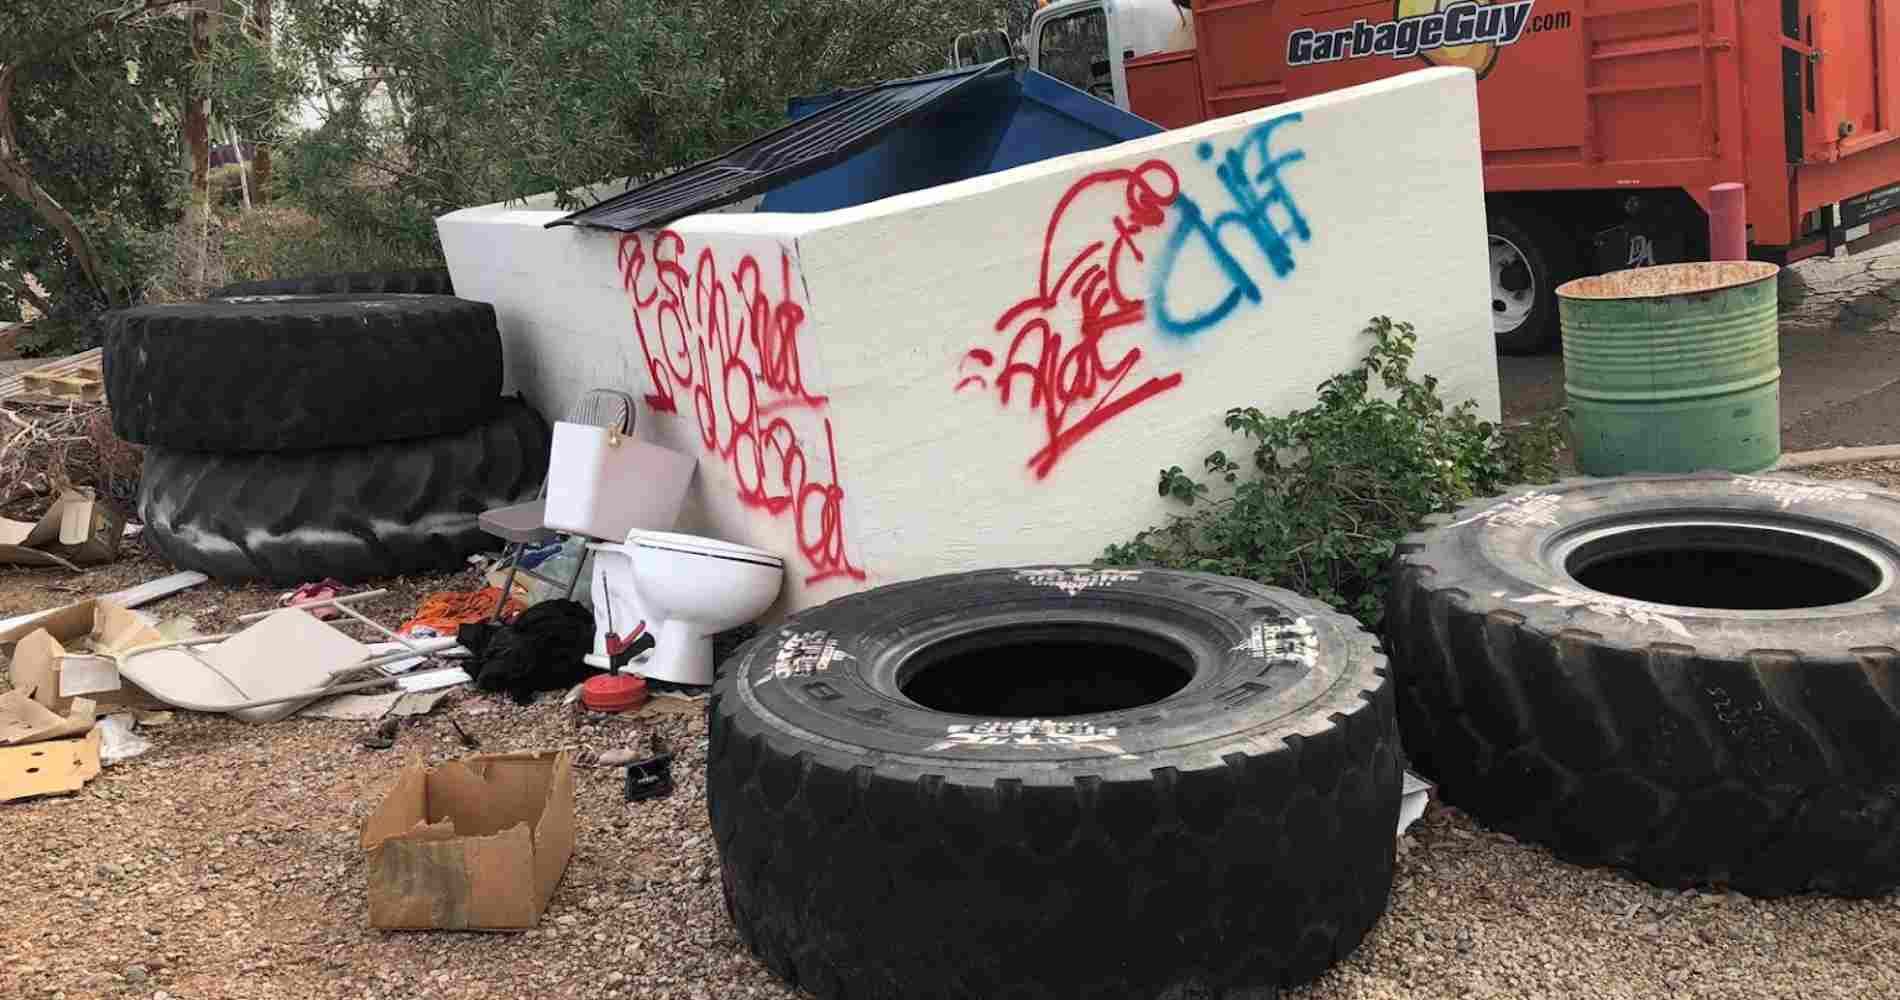 #1 for Tire Disposal in Surprise, AZ with Over 1200 5-Star Reviews!